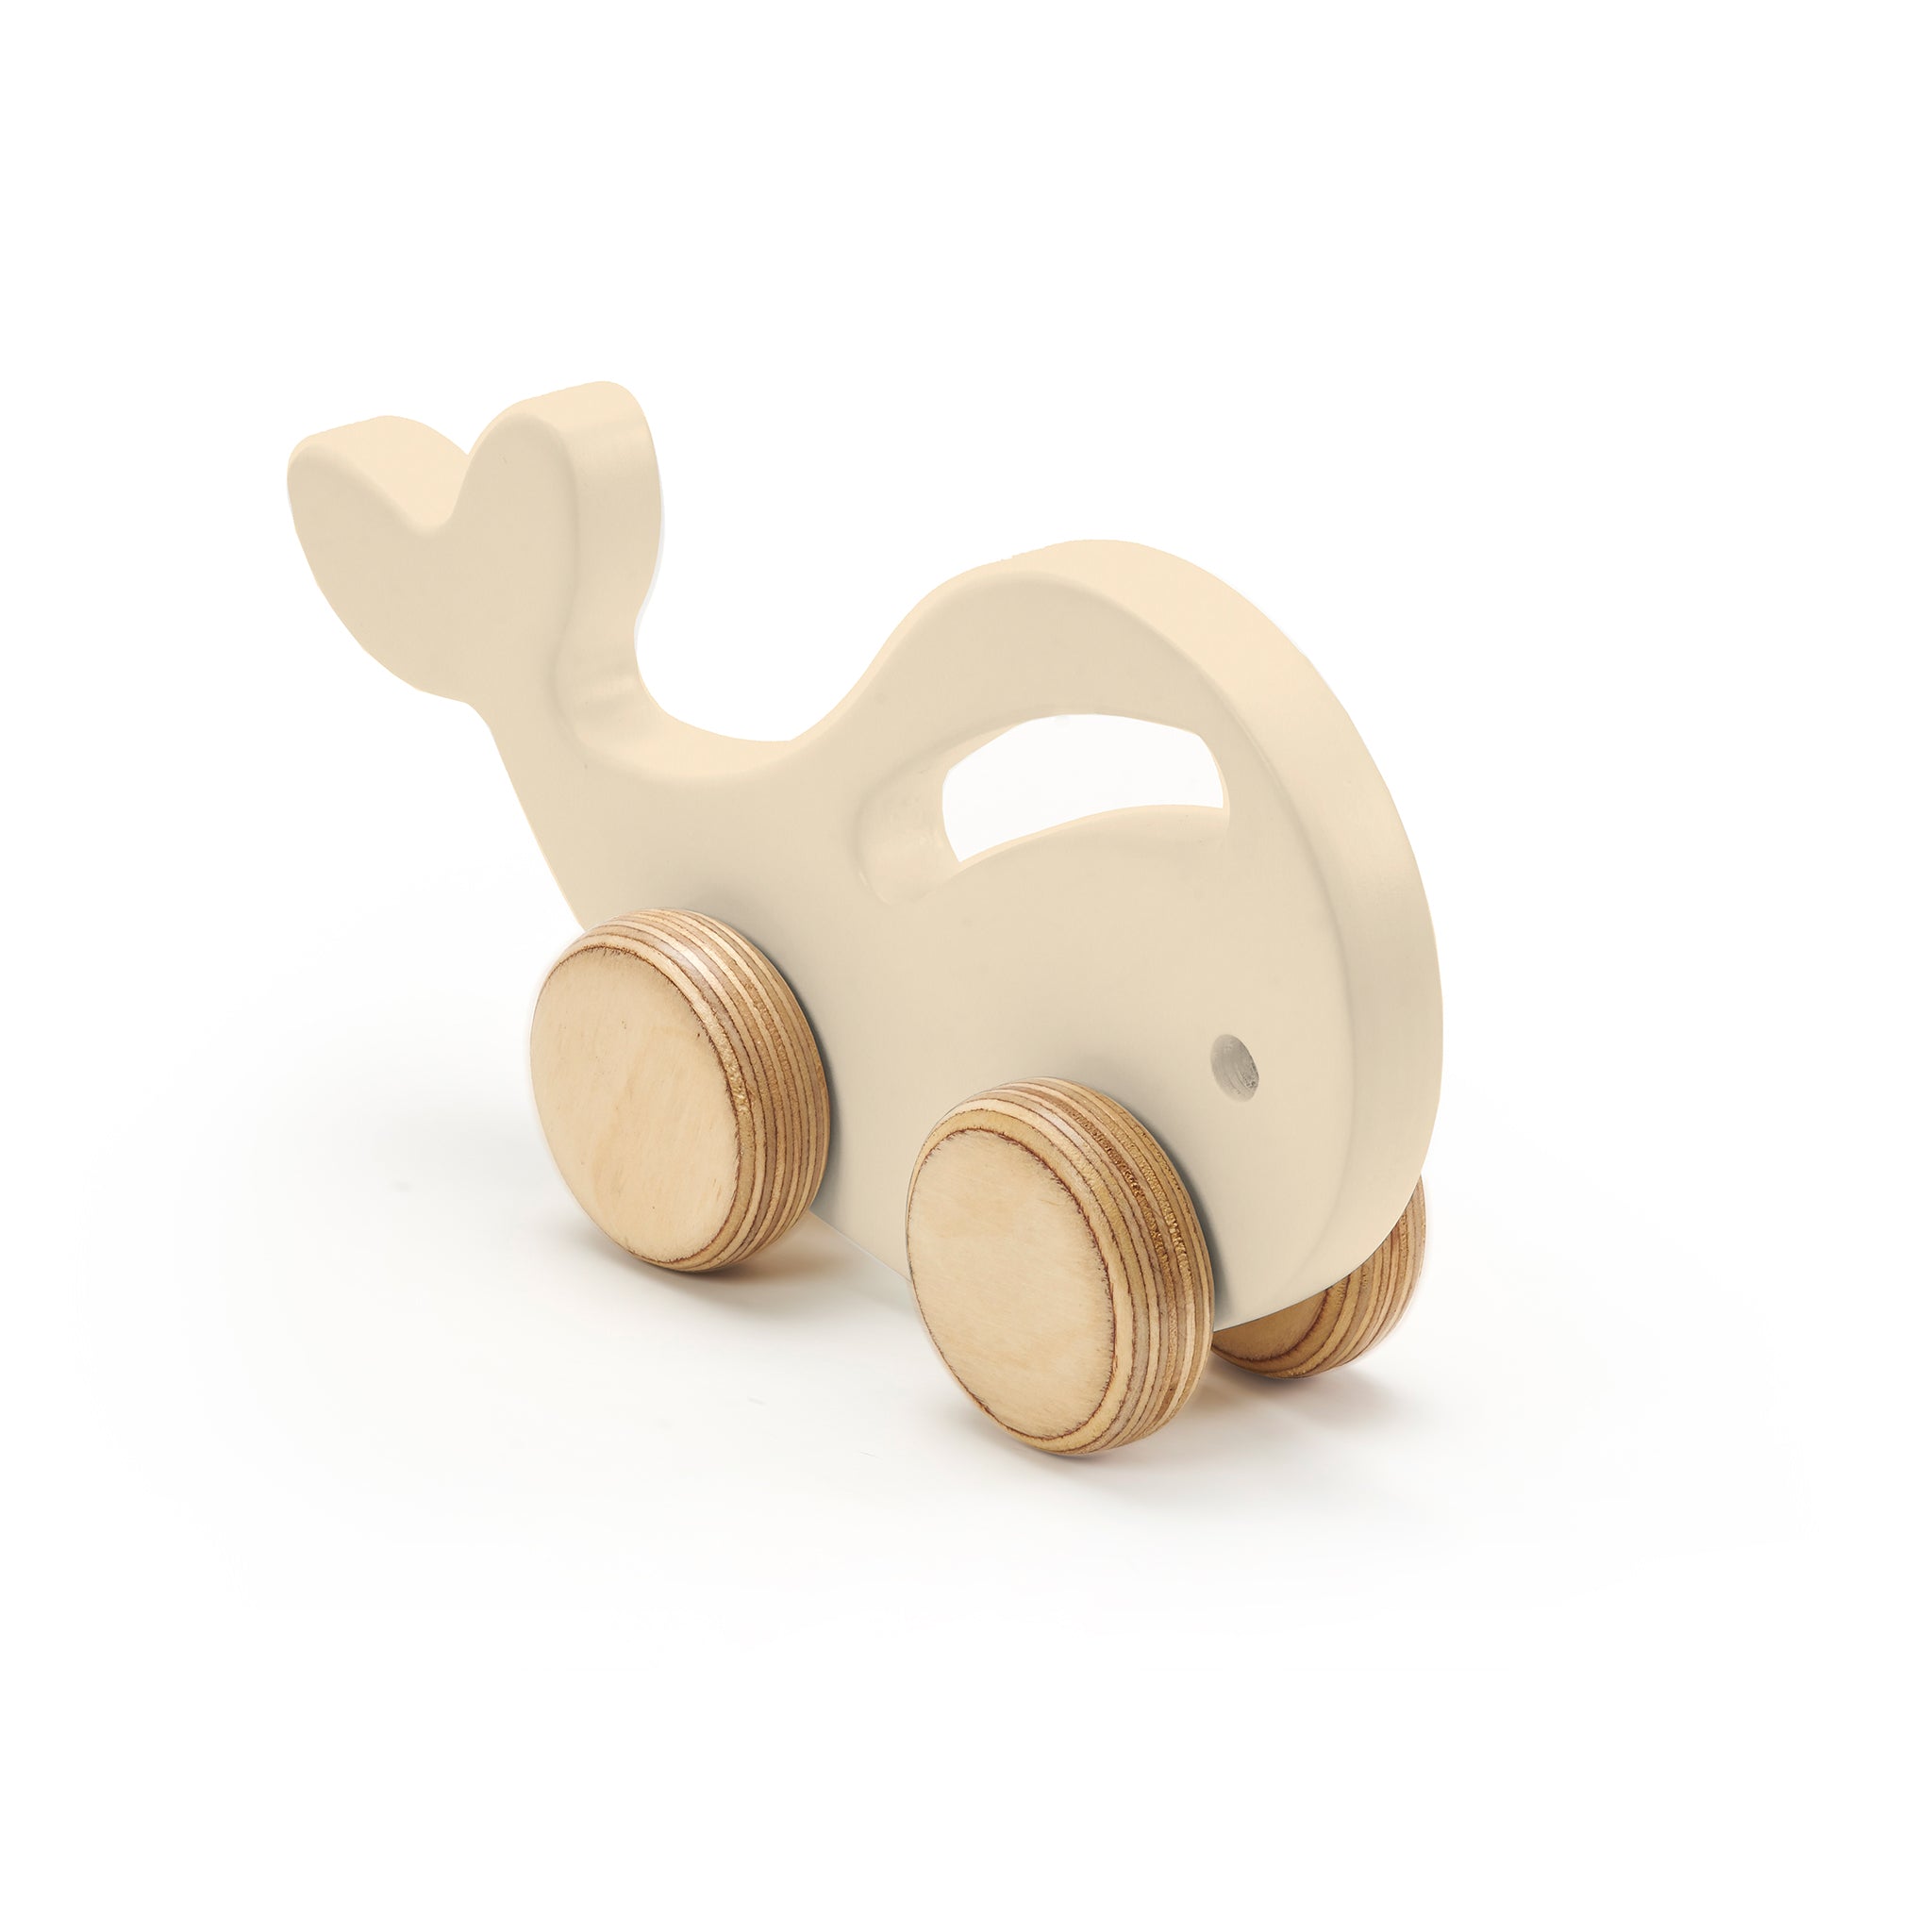 Whale Wheel Wooden Toy